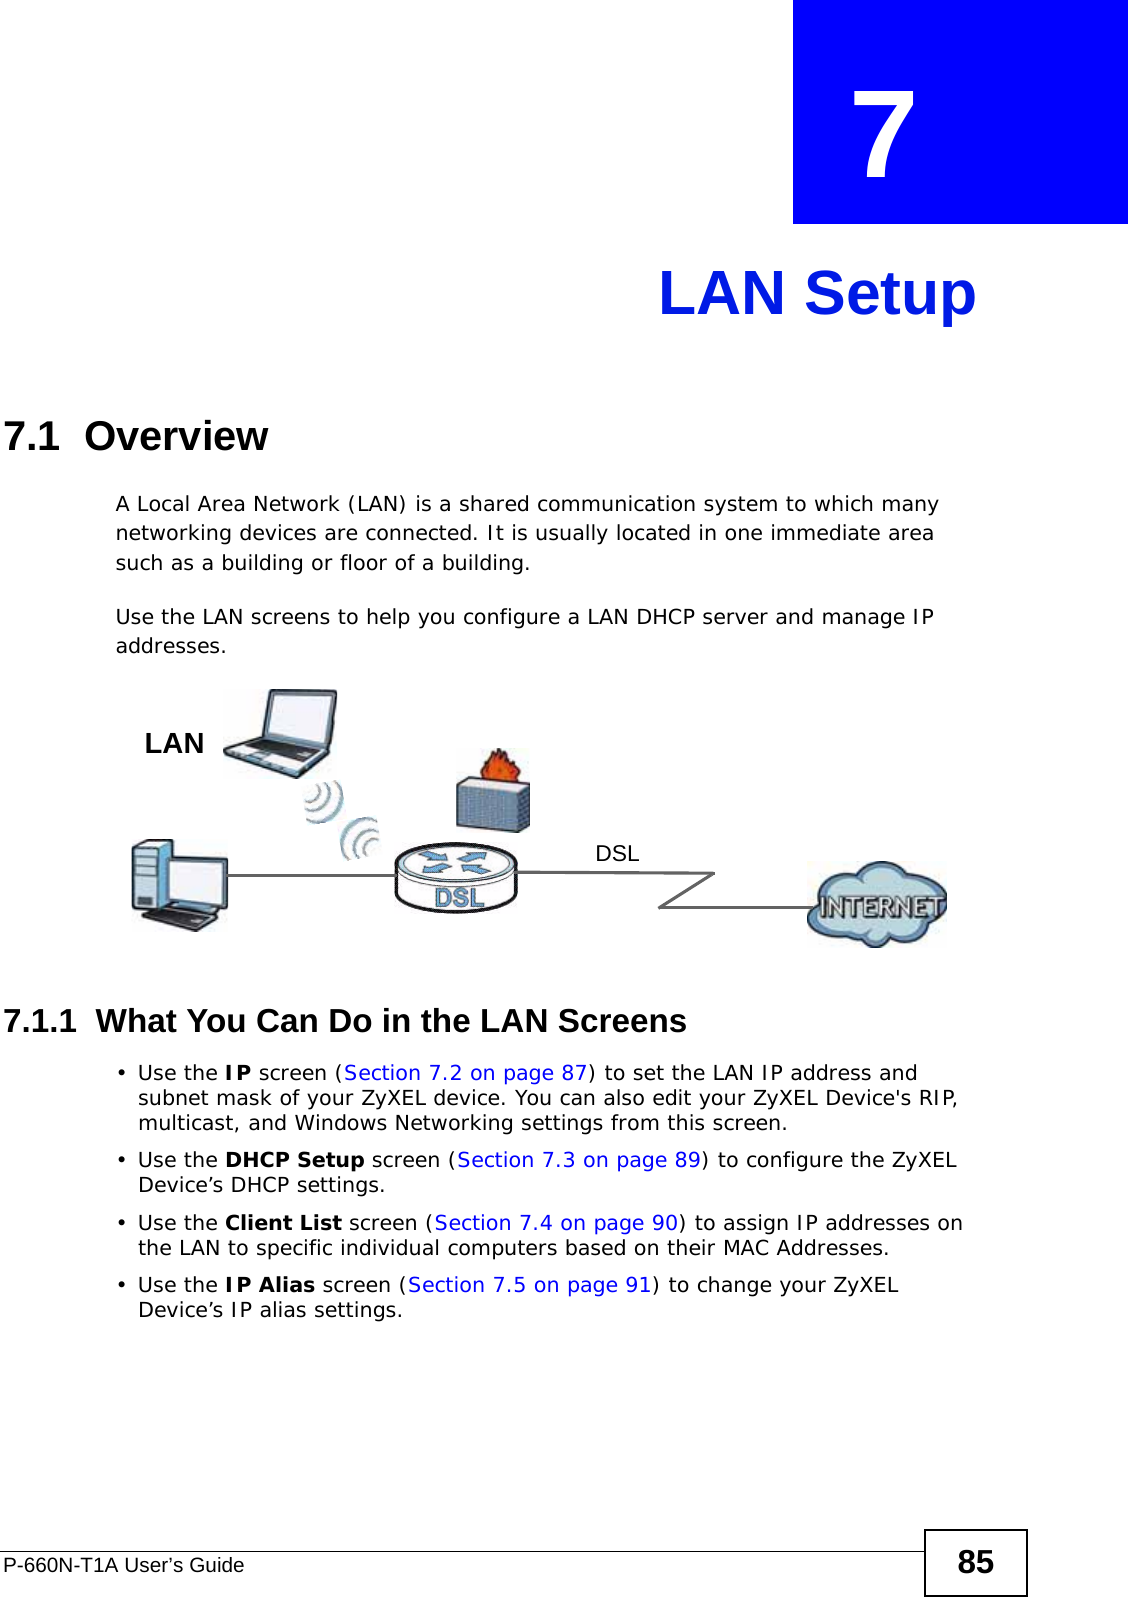 P-660N-T1A User’s Guide 85CHAPTER  7 LAN Setup7.1  OverviewA Local Area Network (LAN) is a shared communication system to which many networking devices are connected. It is usually located in one immediate area such as a building or floor of a building.Use the LAN screens to help you configure a LAN DHCP server and manage IP addresses.7.1.1  What You Can Do in the LAN Screens•Use the IP screen (Section 7.2 on page 87) to set the LAN IP address and subnet mask of your ZyXEL device. You can also edit your ZyXEL Device&apos;s RIP, multicast, and Windows Networking settings from this screen.•Use the DHCP Setup screen (Section 7.3 on page 89) to configure the ZyXEL Device’s DHCP settings.•Use the Client List screen (Section 7.4 on page 90) to assign IP addresses on the LAN to specific individual computers based on their MAC Addresses. •Use the IP Alias screen (Section 7.5 on page 91) to change your ZyXEL Device’s IP alias settings.DSLLAN